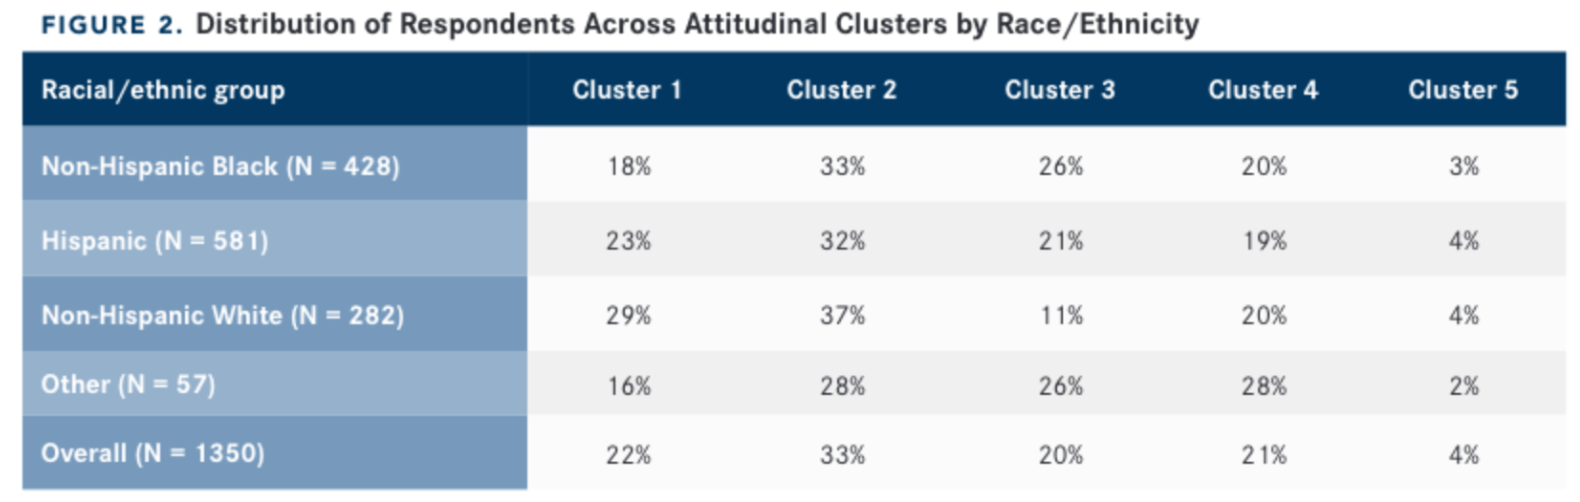 Distribution of Respondents Across Attitudinal Clusters by Race/Ethnicity